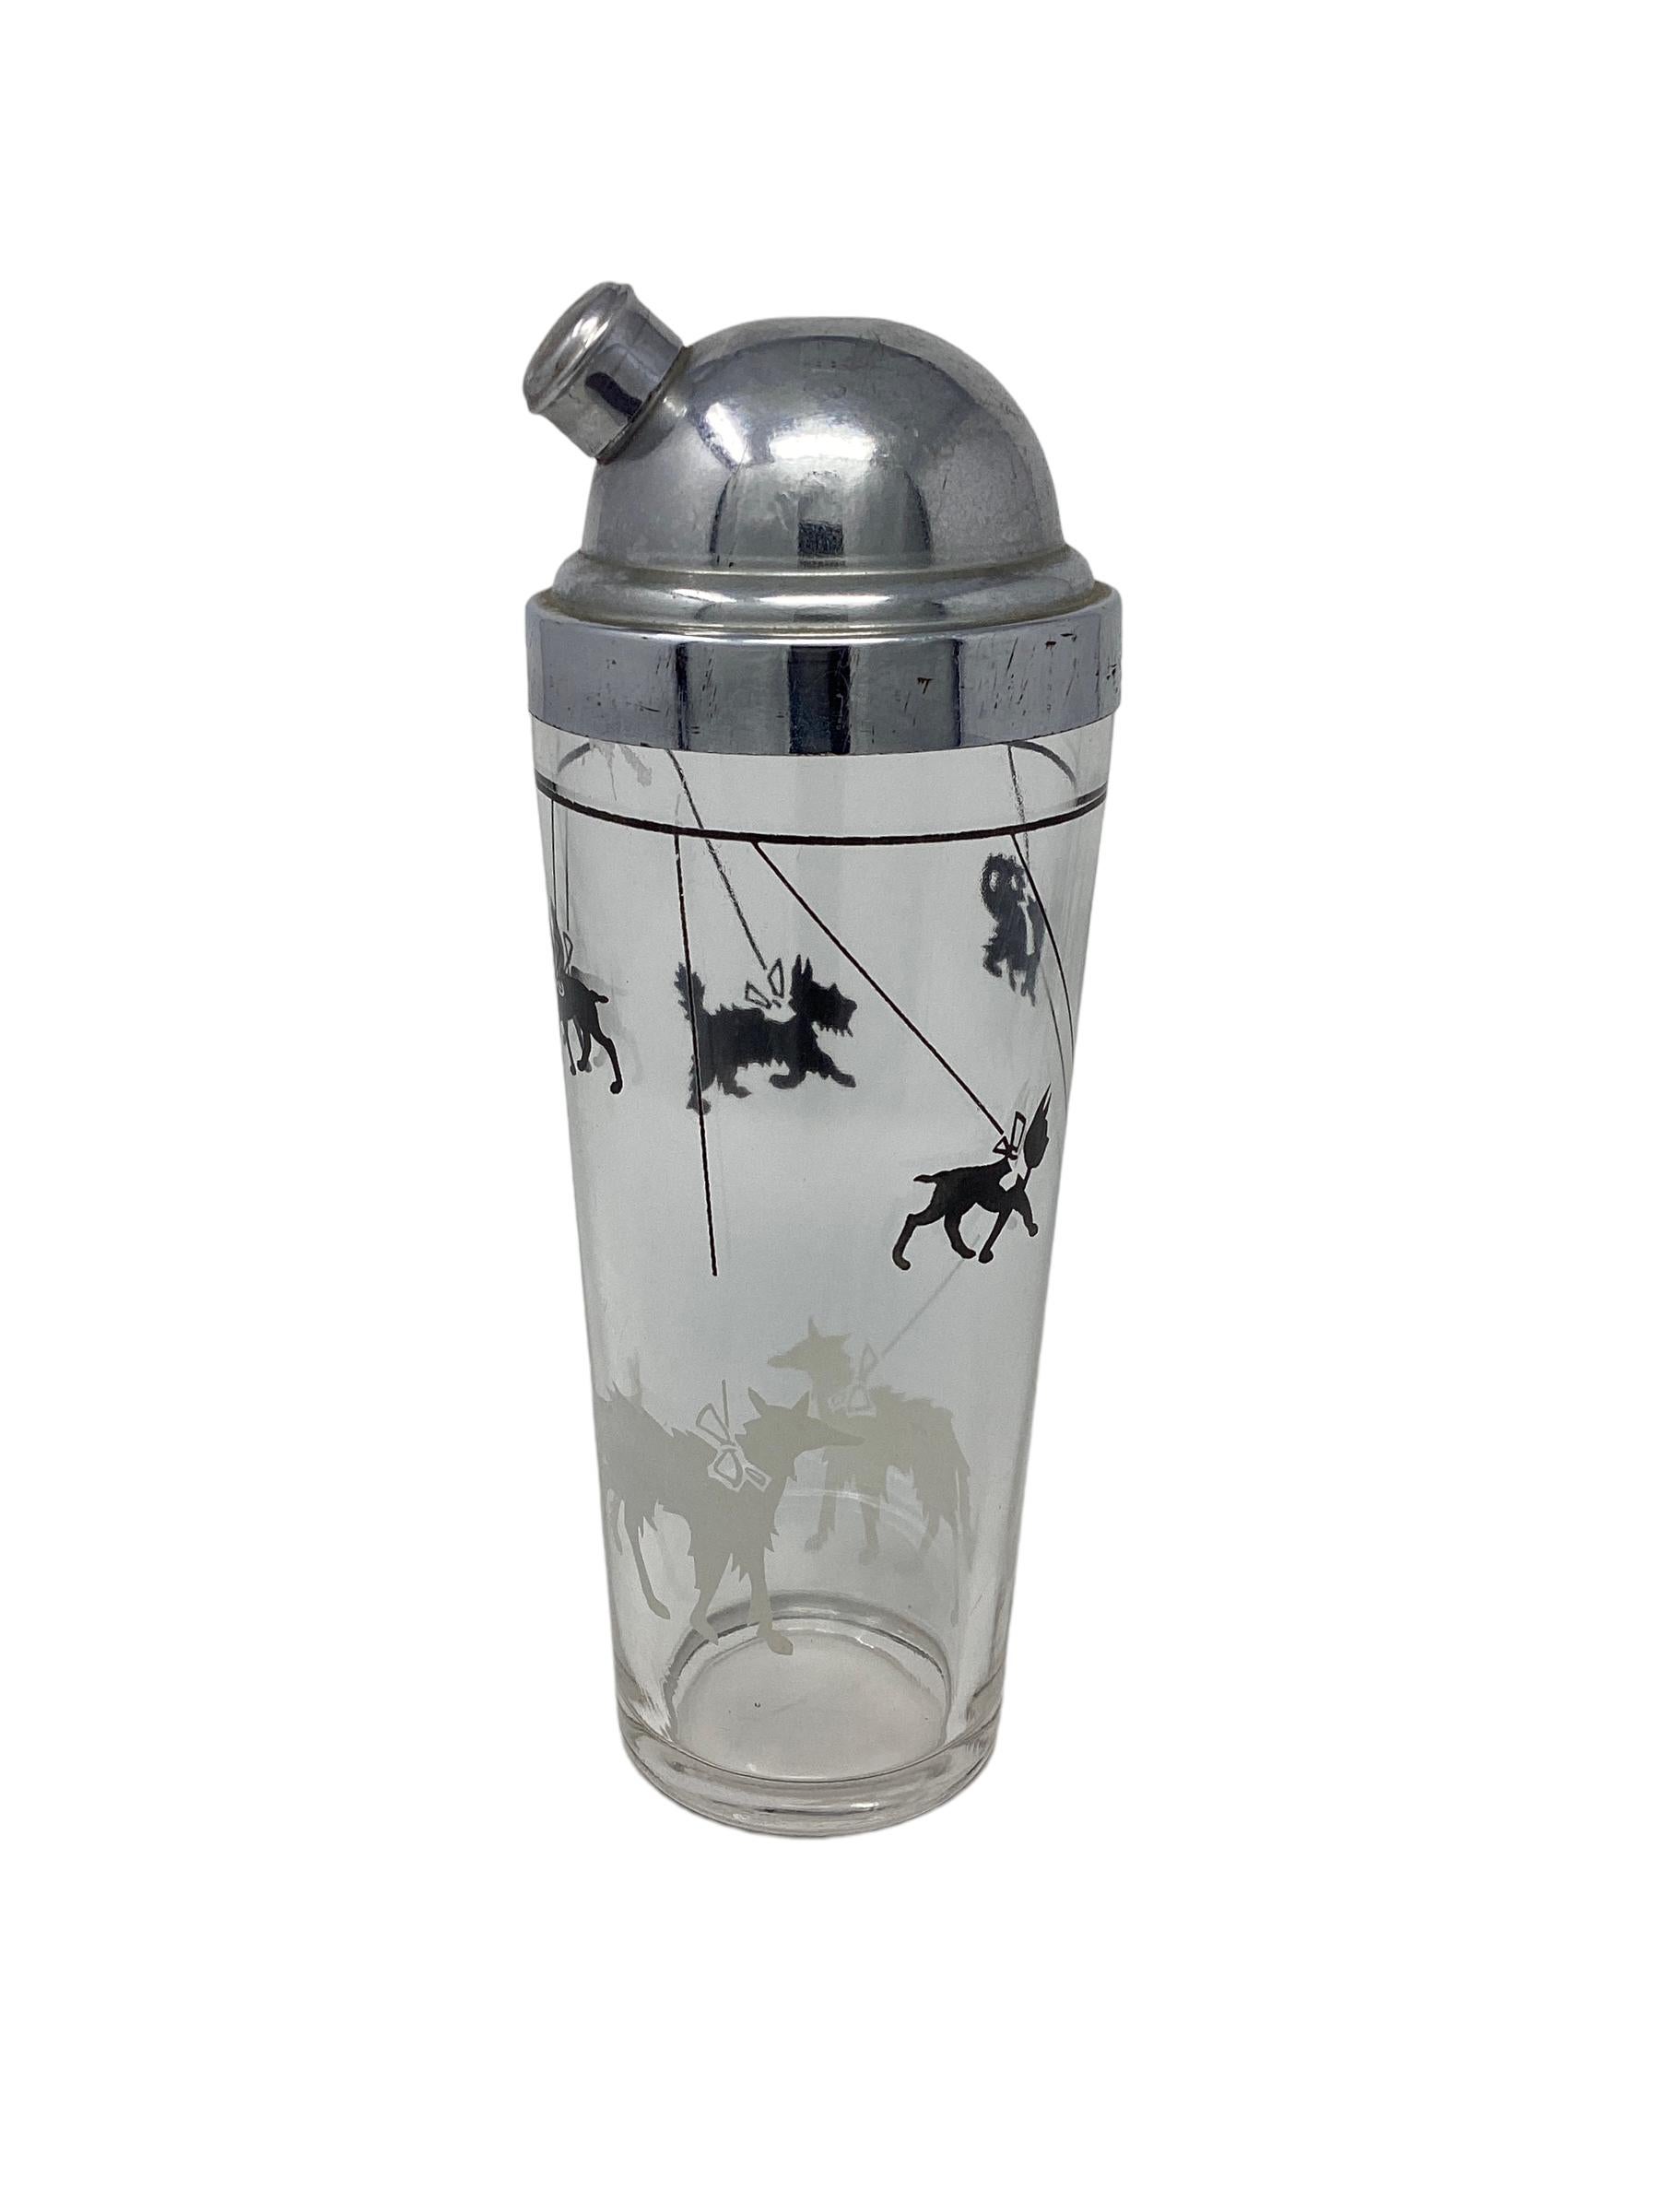 Art Deco Hazel-Atlas Cocktail Shaker with Leashed Dogs For Sale 3